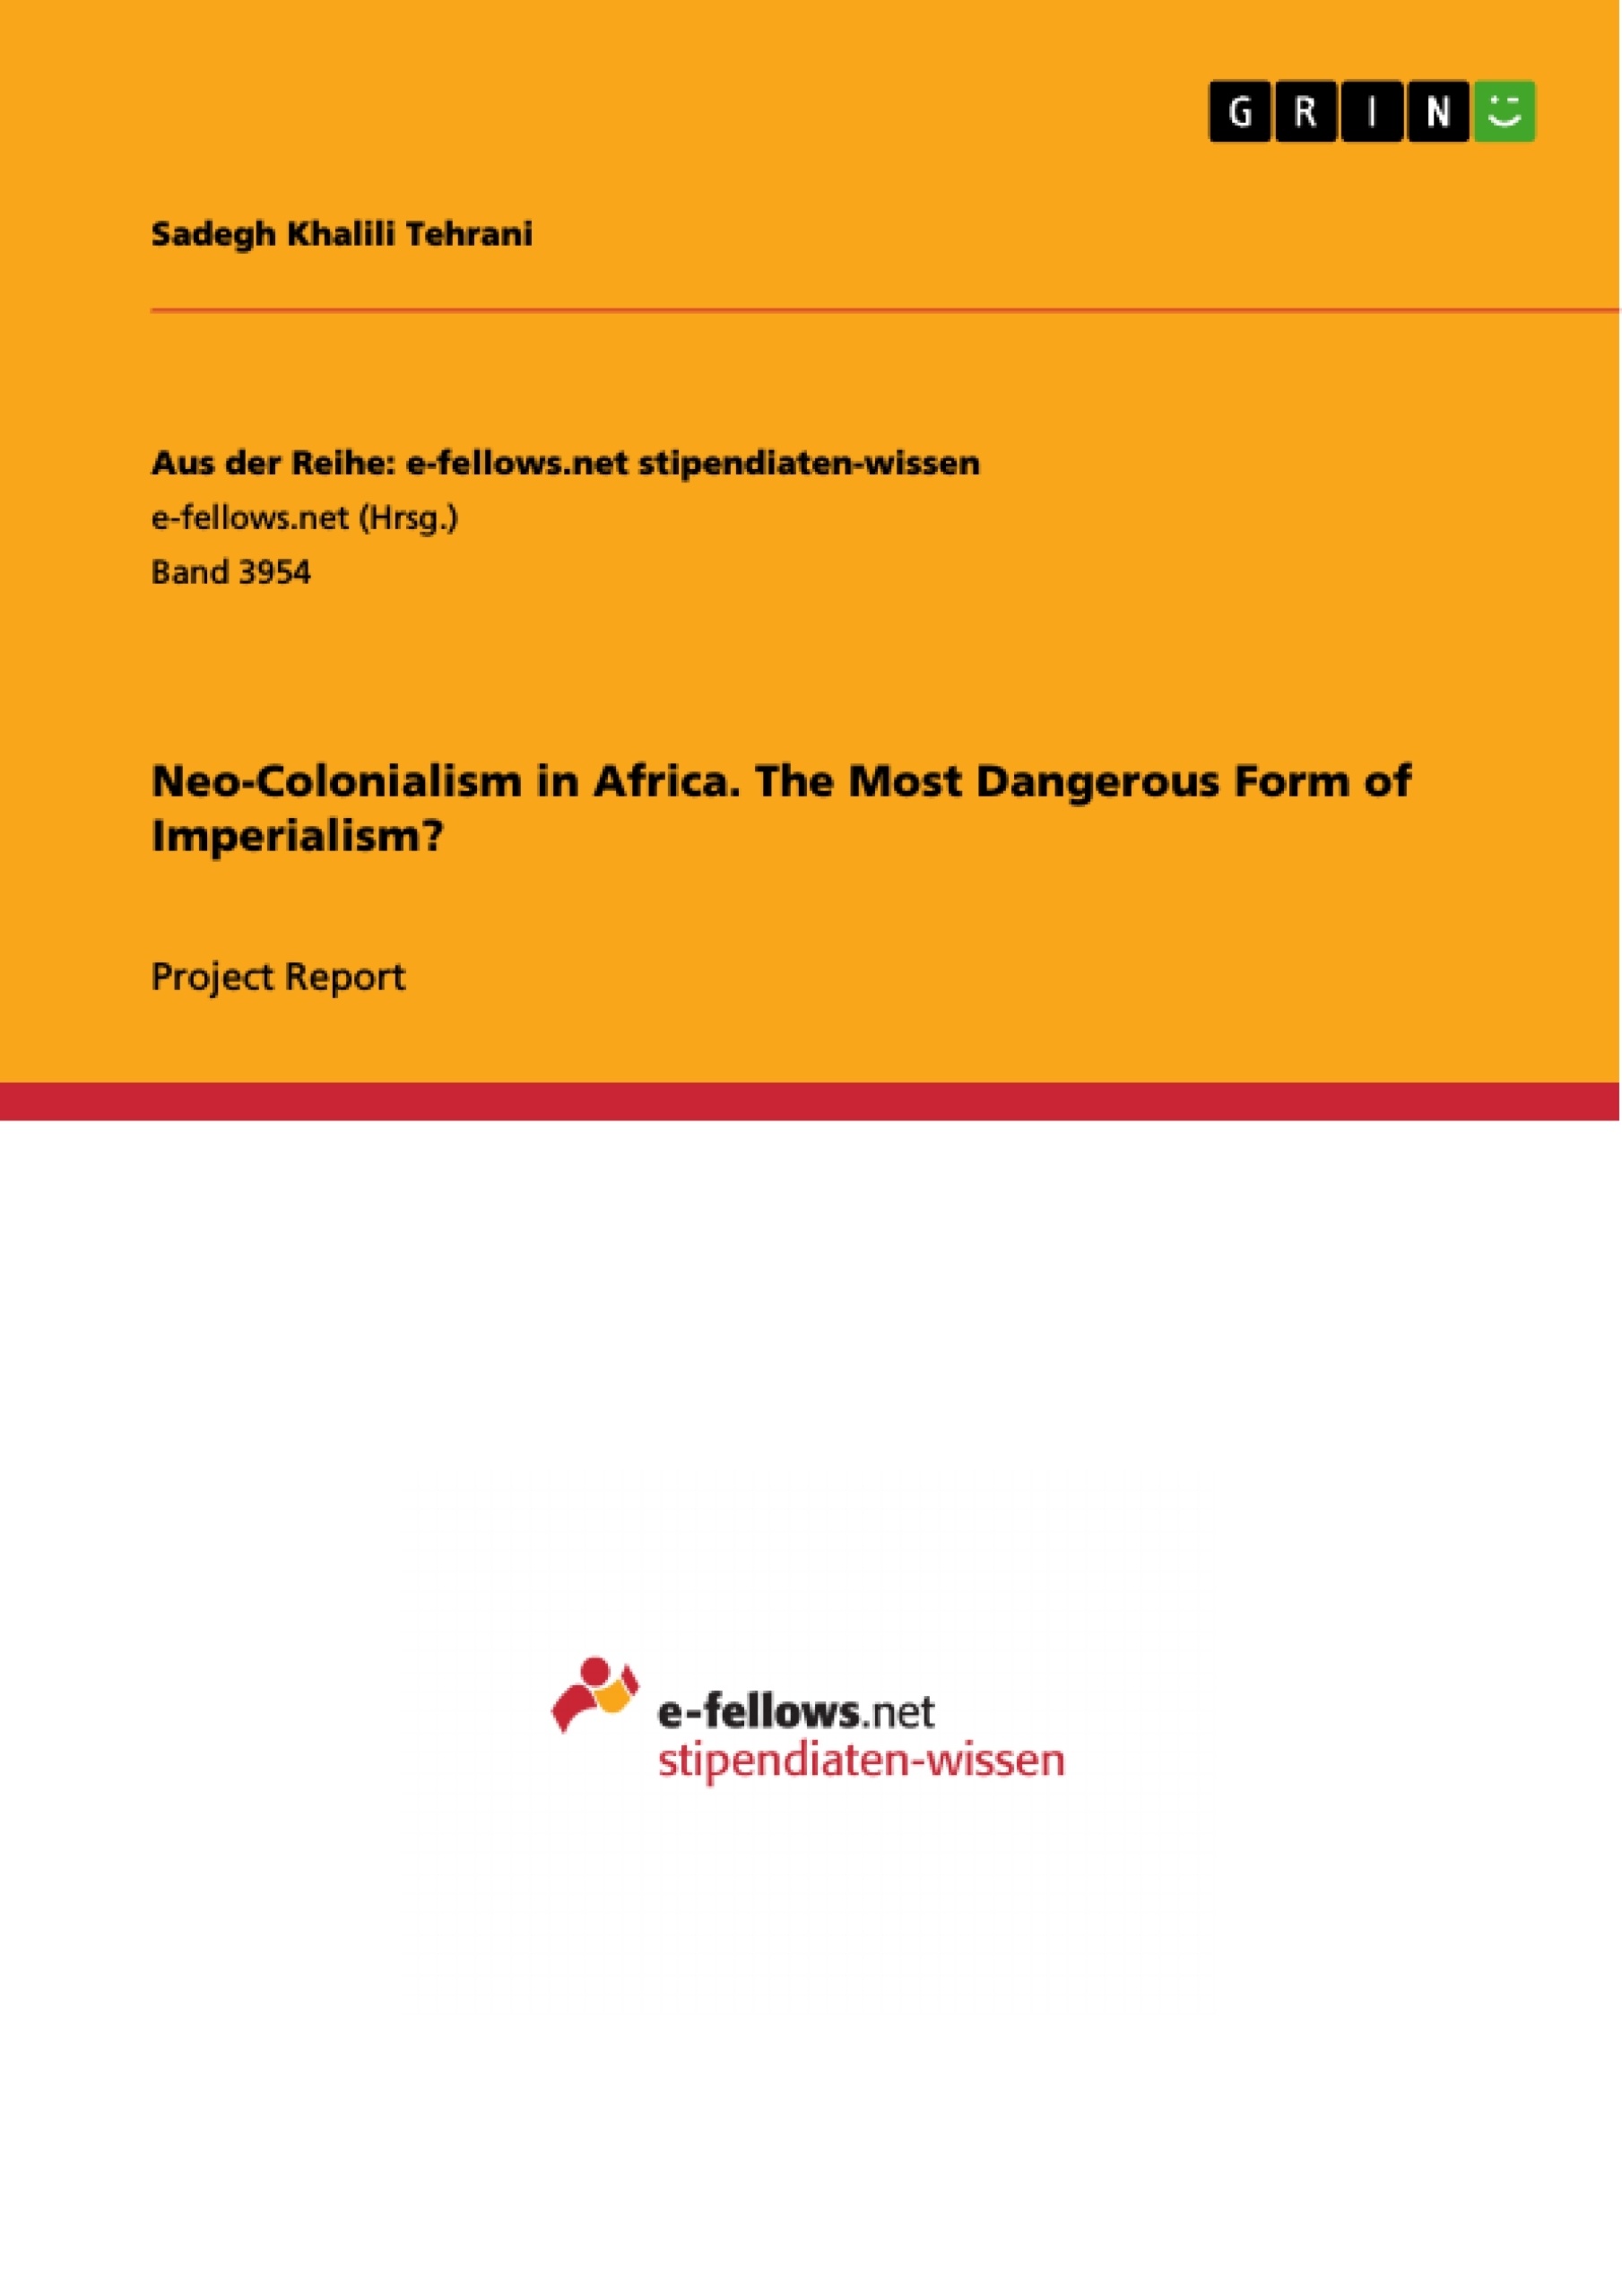 Title: Neo-Colonialism in Africa. The Most Dangerous Form of Imperialism?